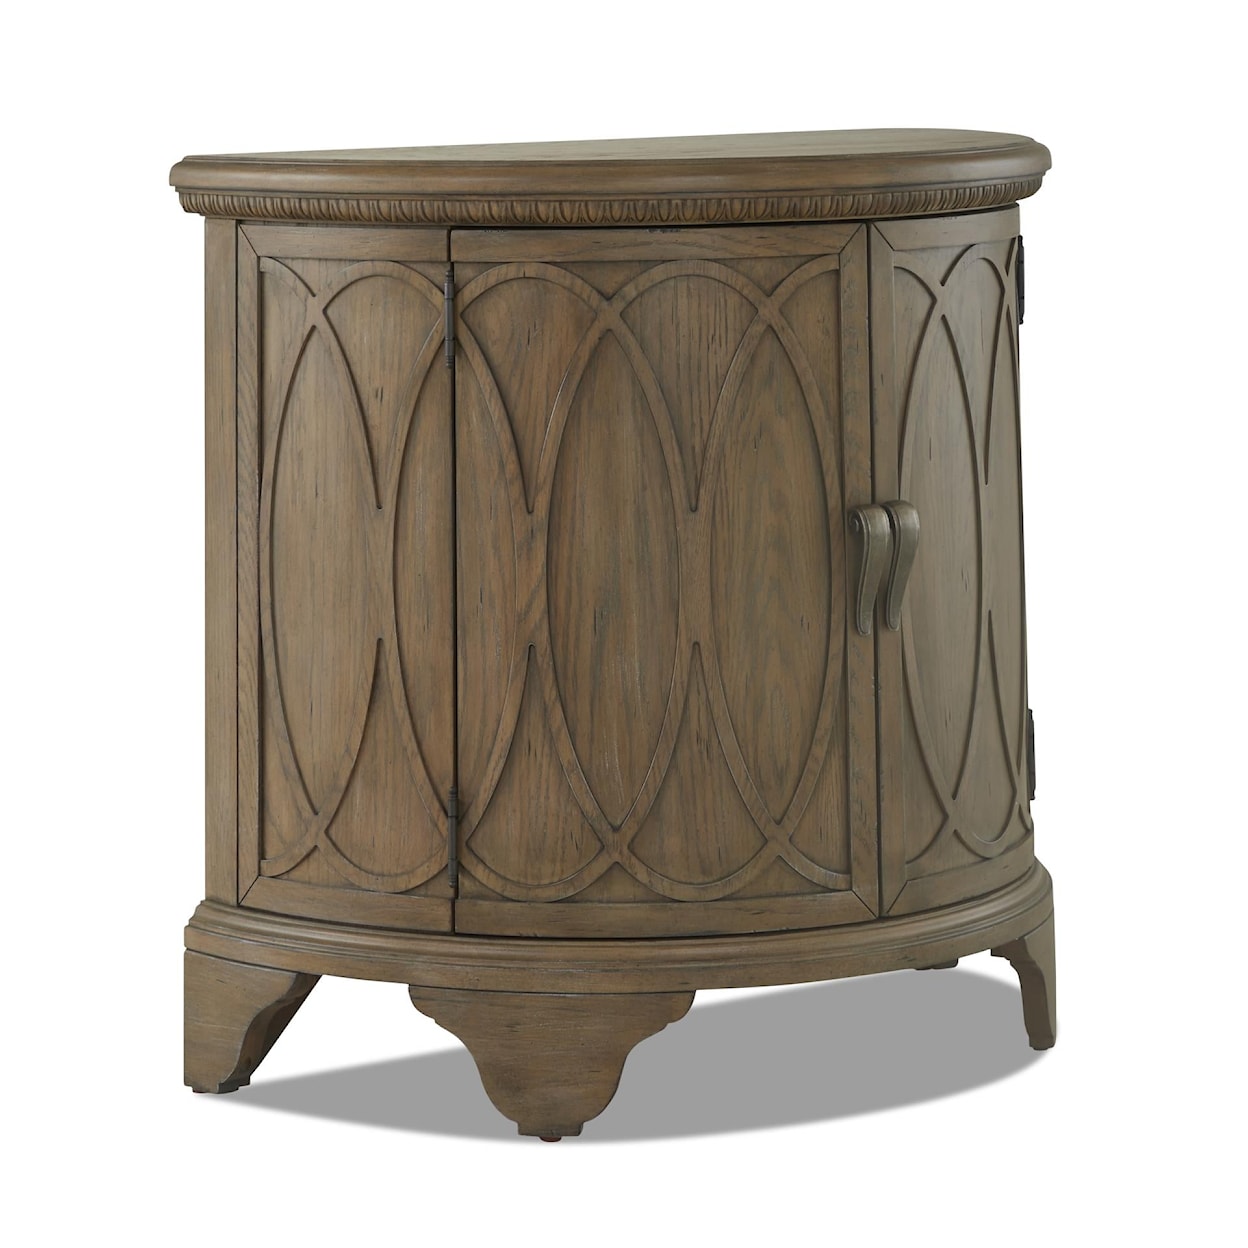 Trisha Yearwood Home Collection by Legacy Classic Jasper County Chest